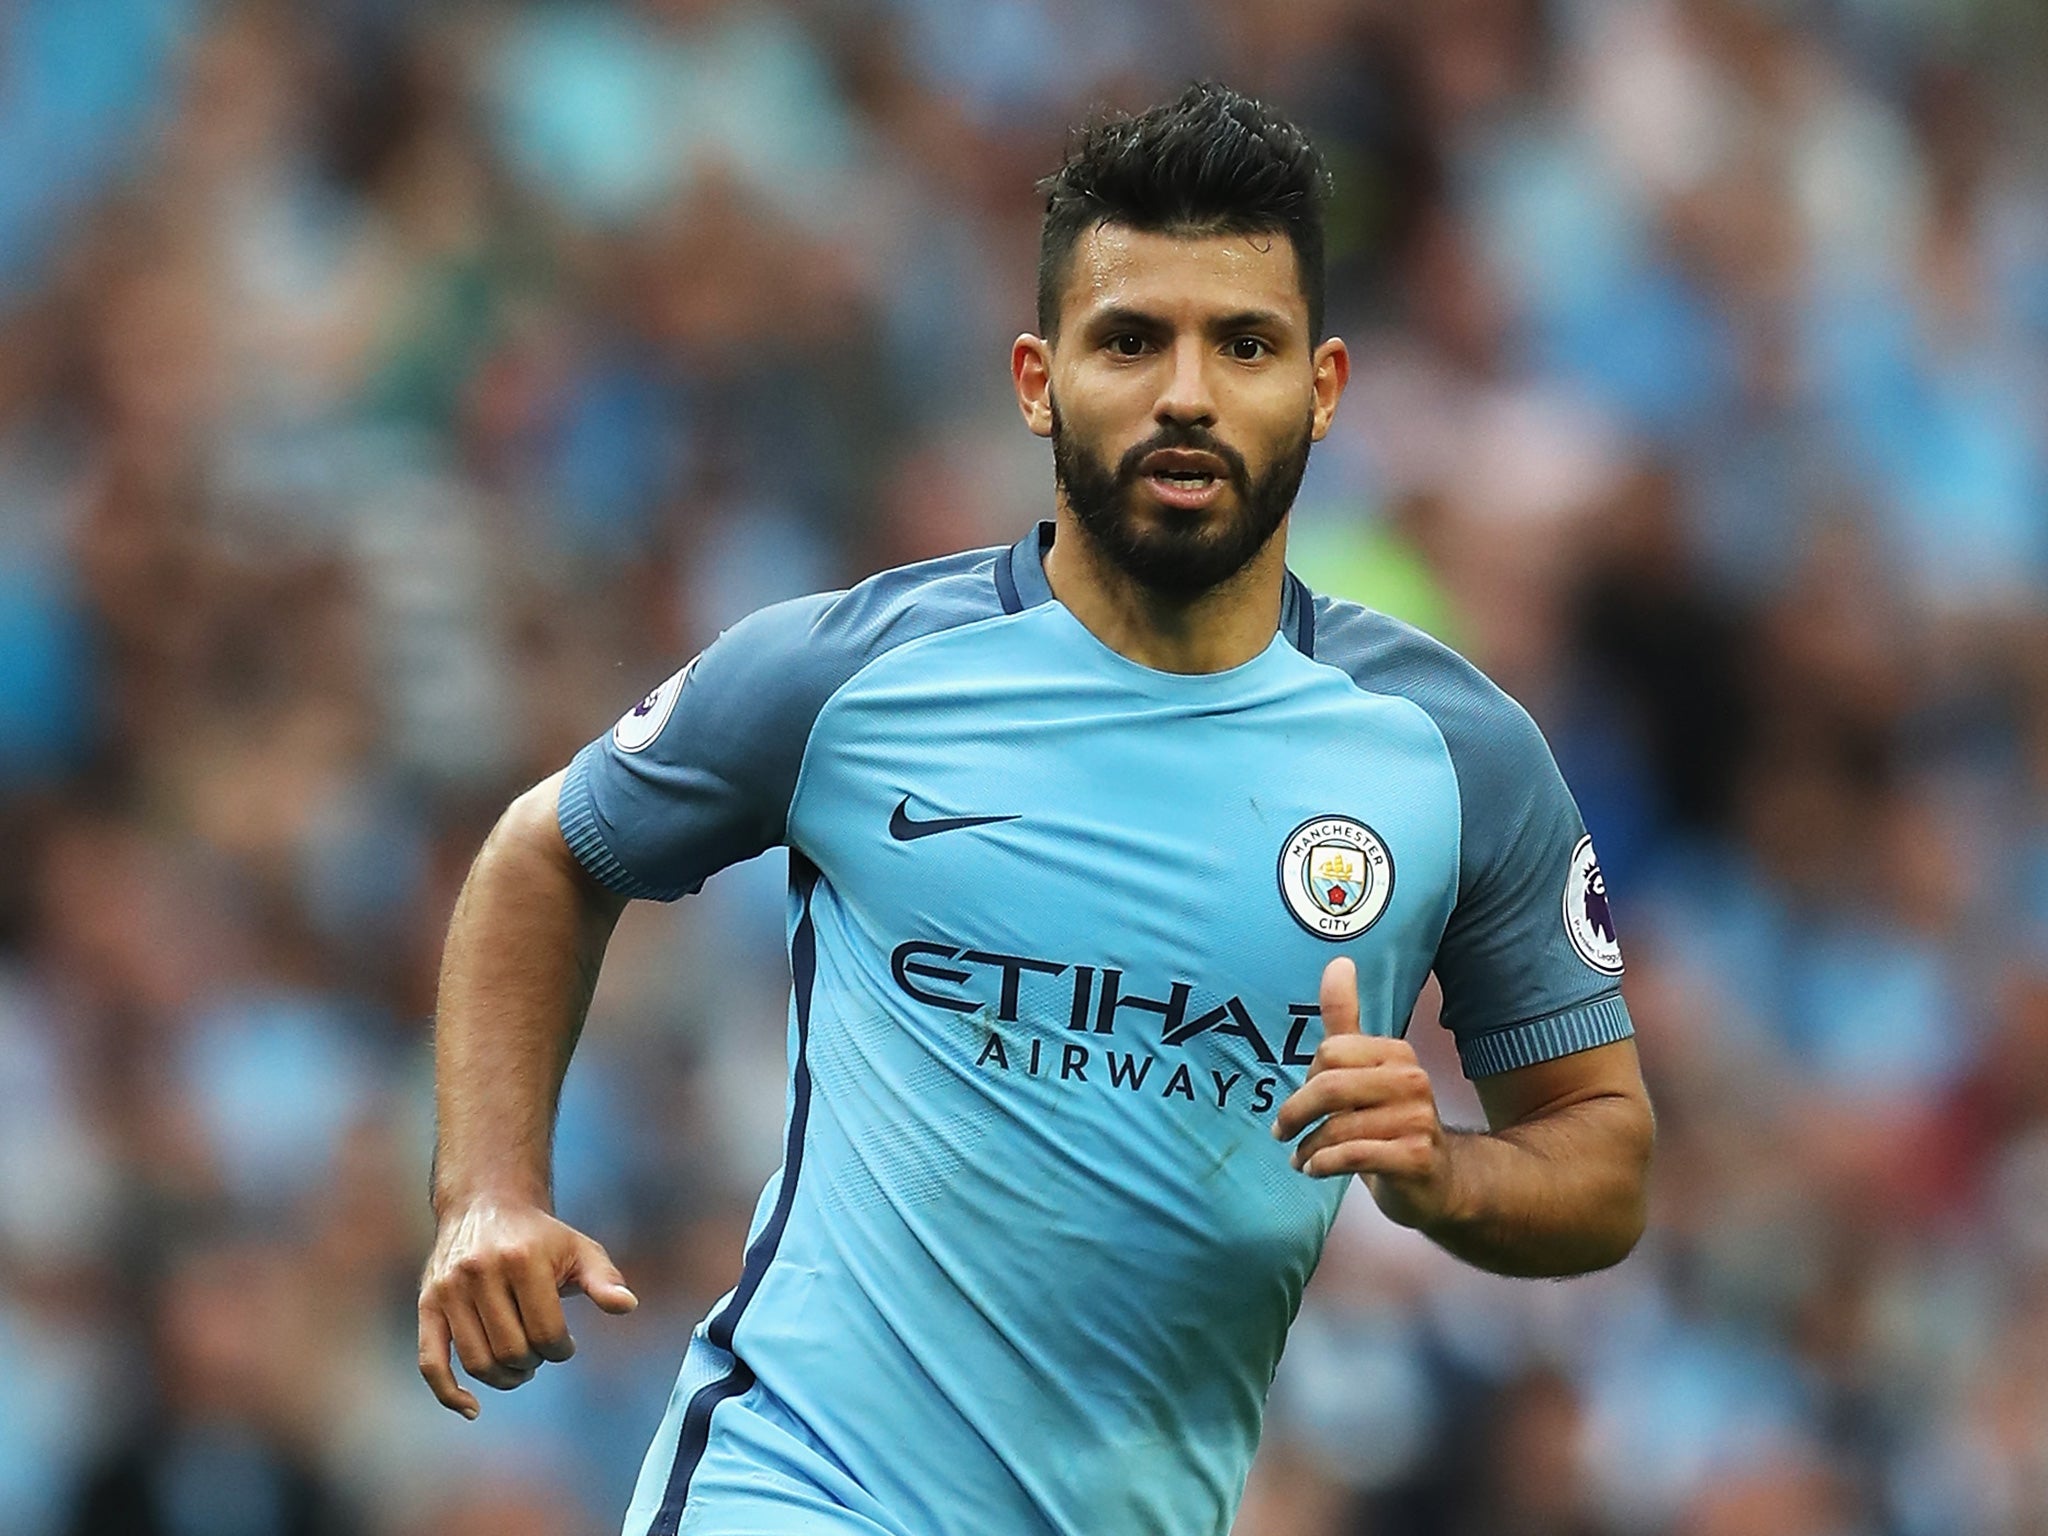 Aguero appeared to elbow Reid during City's 3-1 win over West Ham